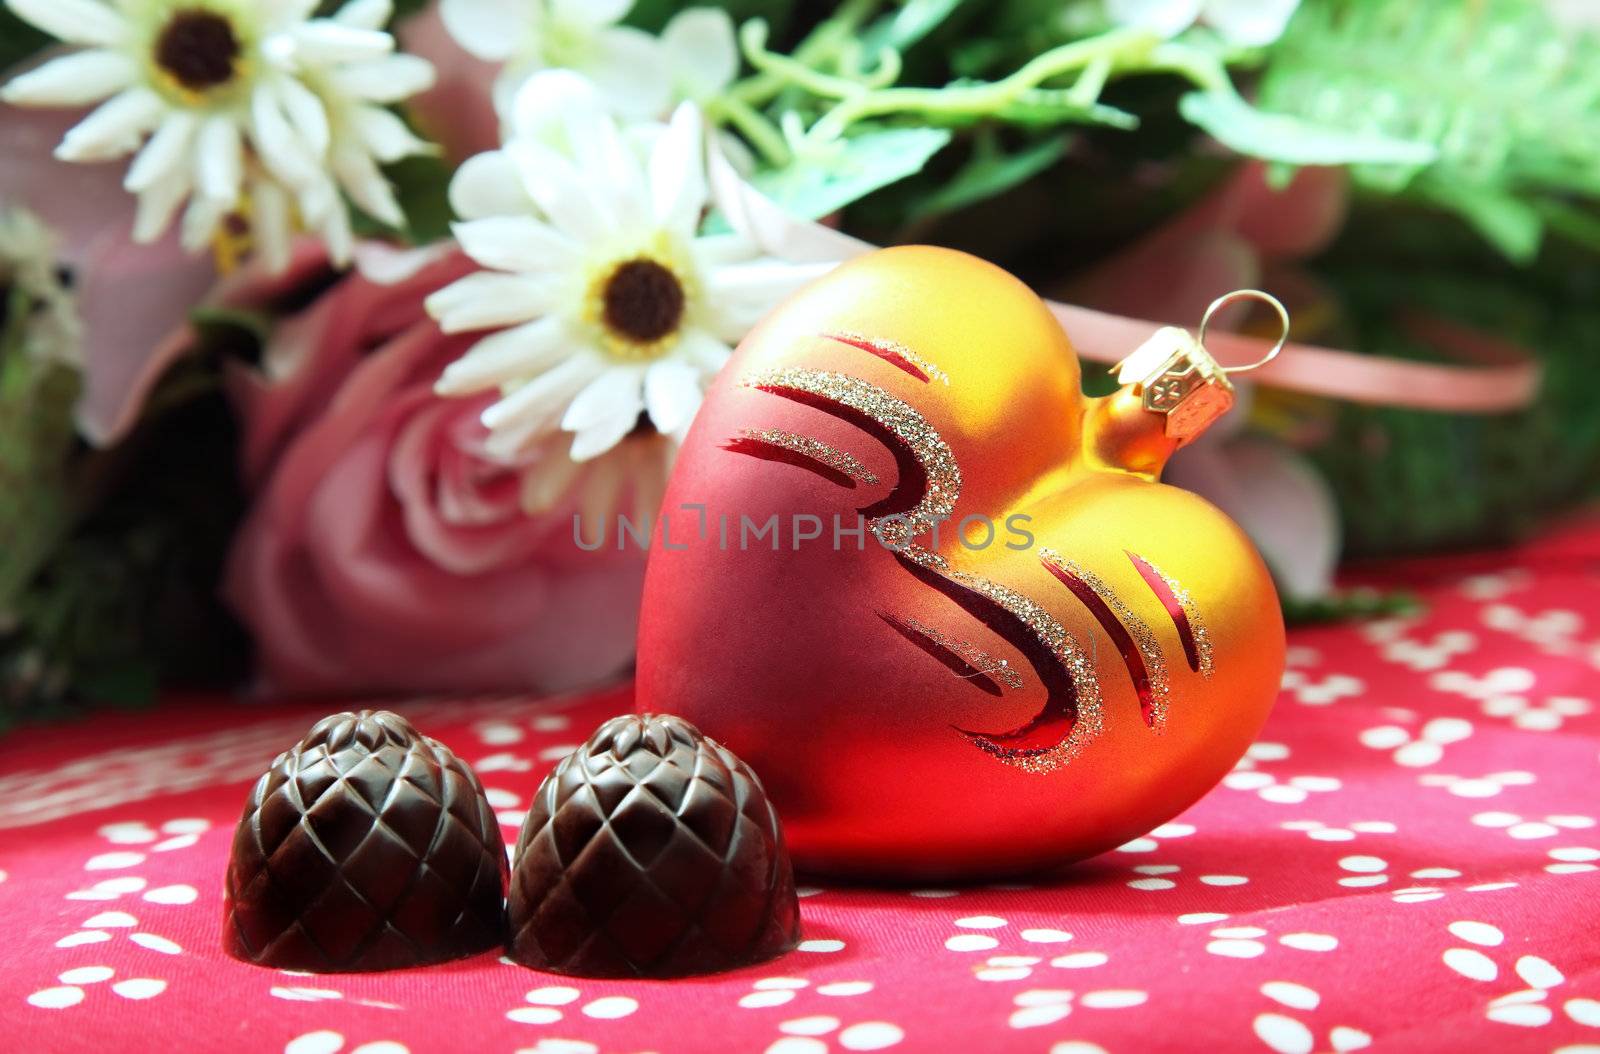 Chocolate sweets hearts and flowers as a symbol of Valentine's Day